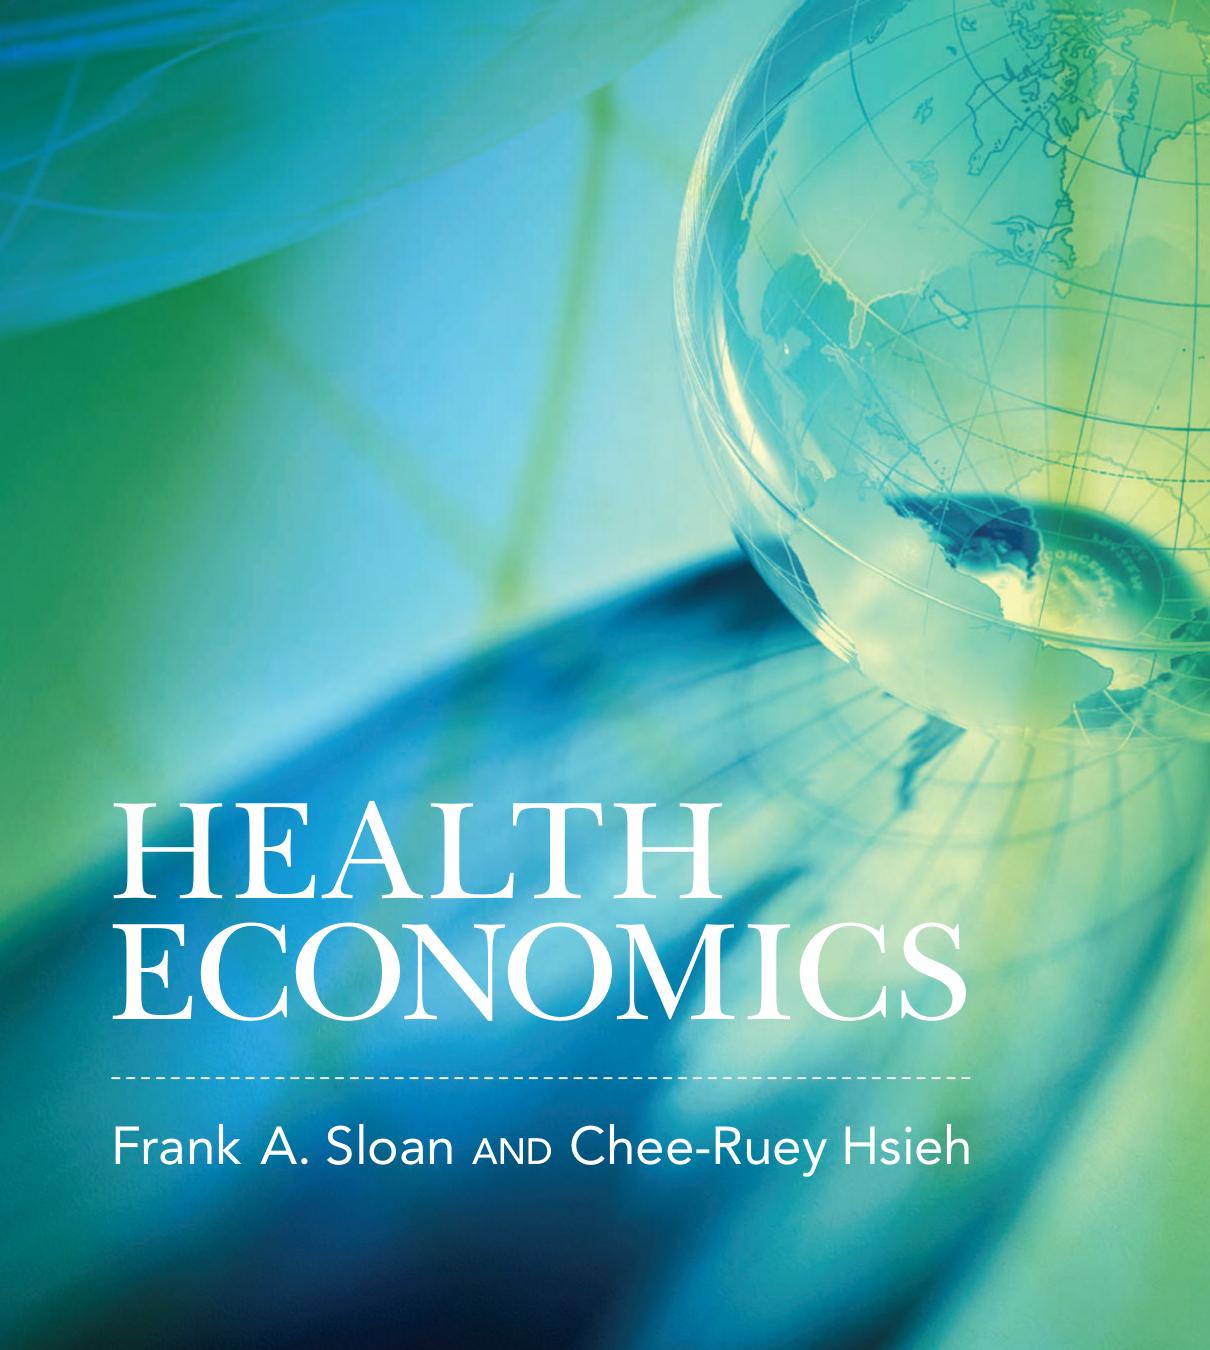 Health Economics 2nd Edition by Frank A. Sloan & Chee-Ruey Hsieh.jpg